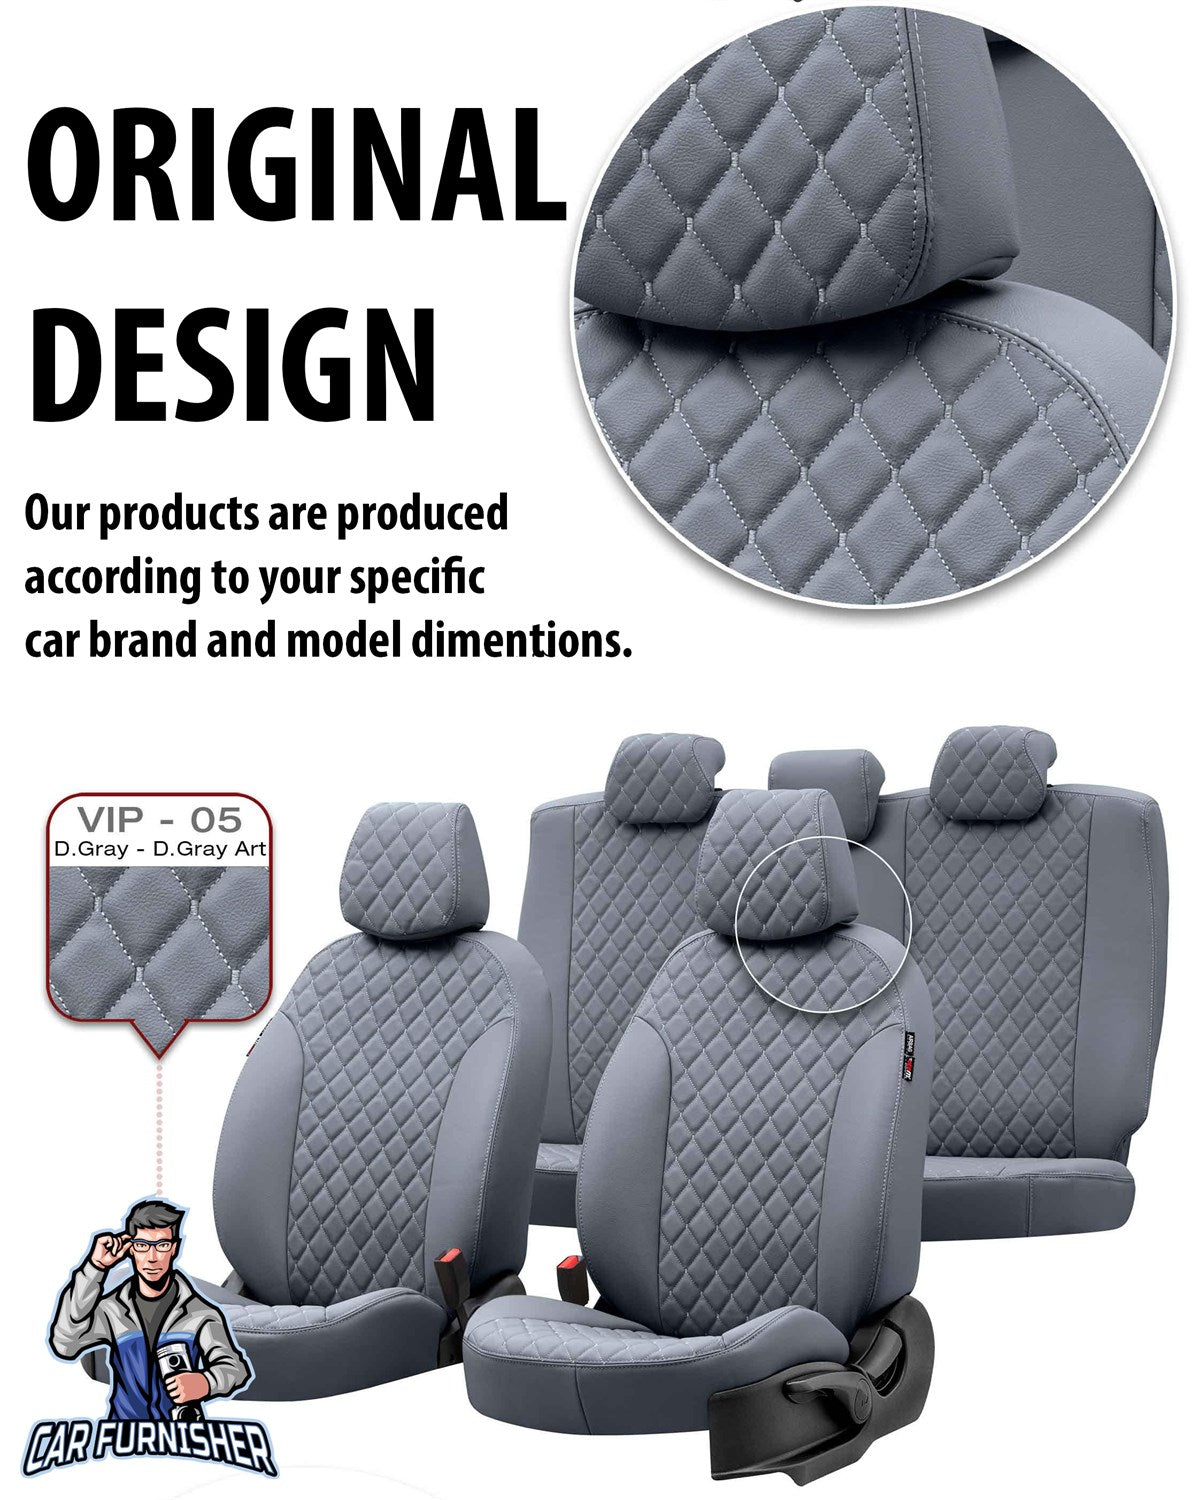 Mercedes X-Class Seat Covers Madrid Leather Design Beige Leather